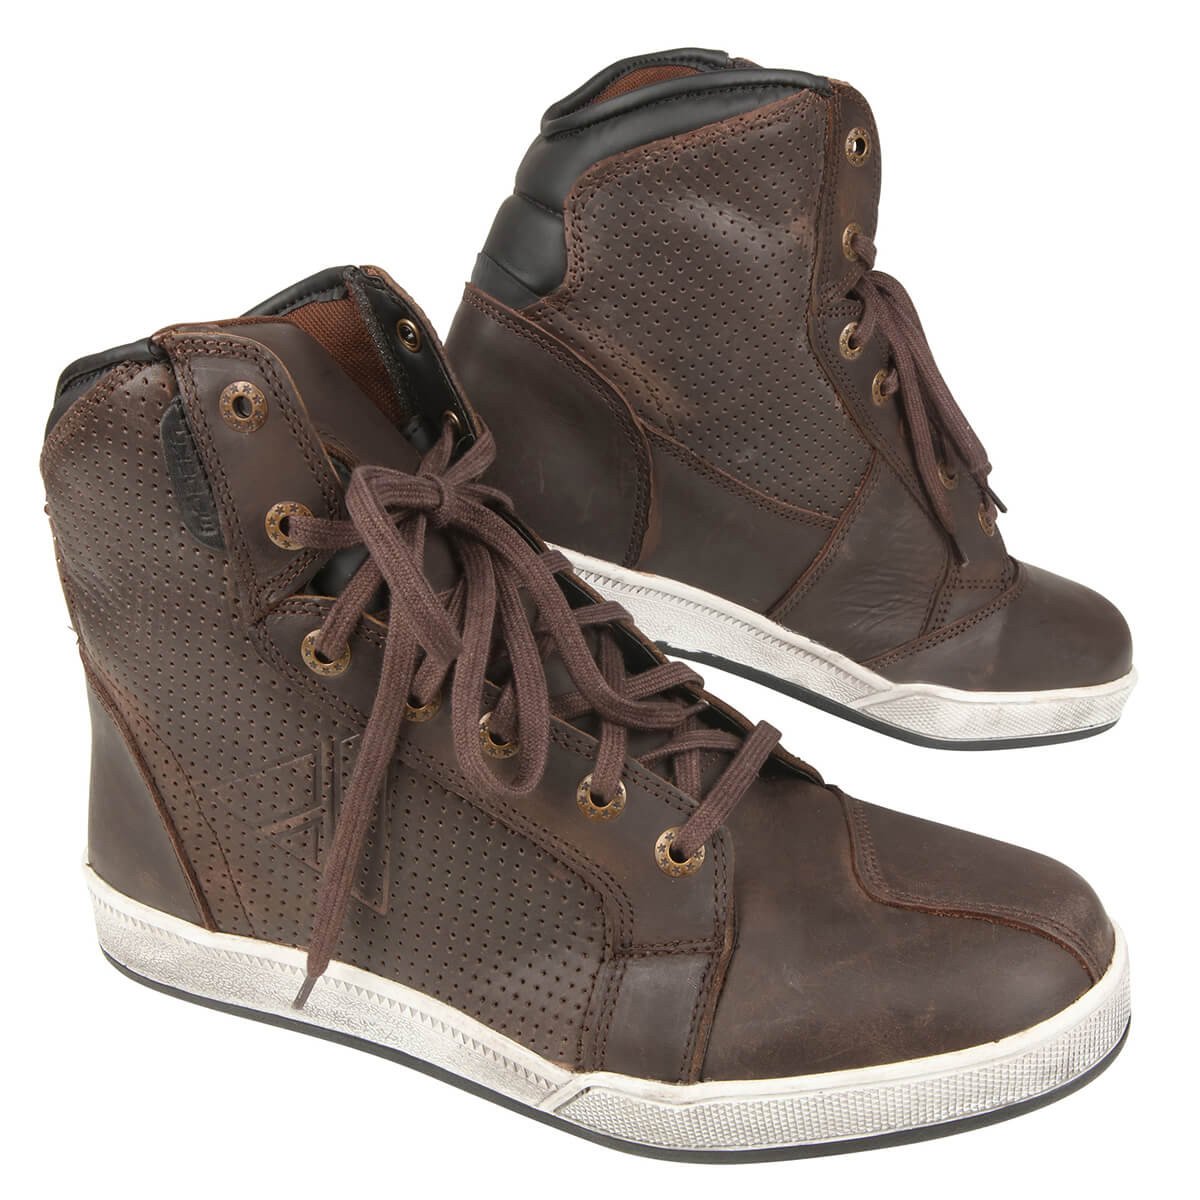 Image of Modeka Midtown Sneakers Brown Size 42 ID 4045765137956